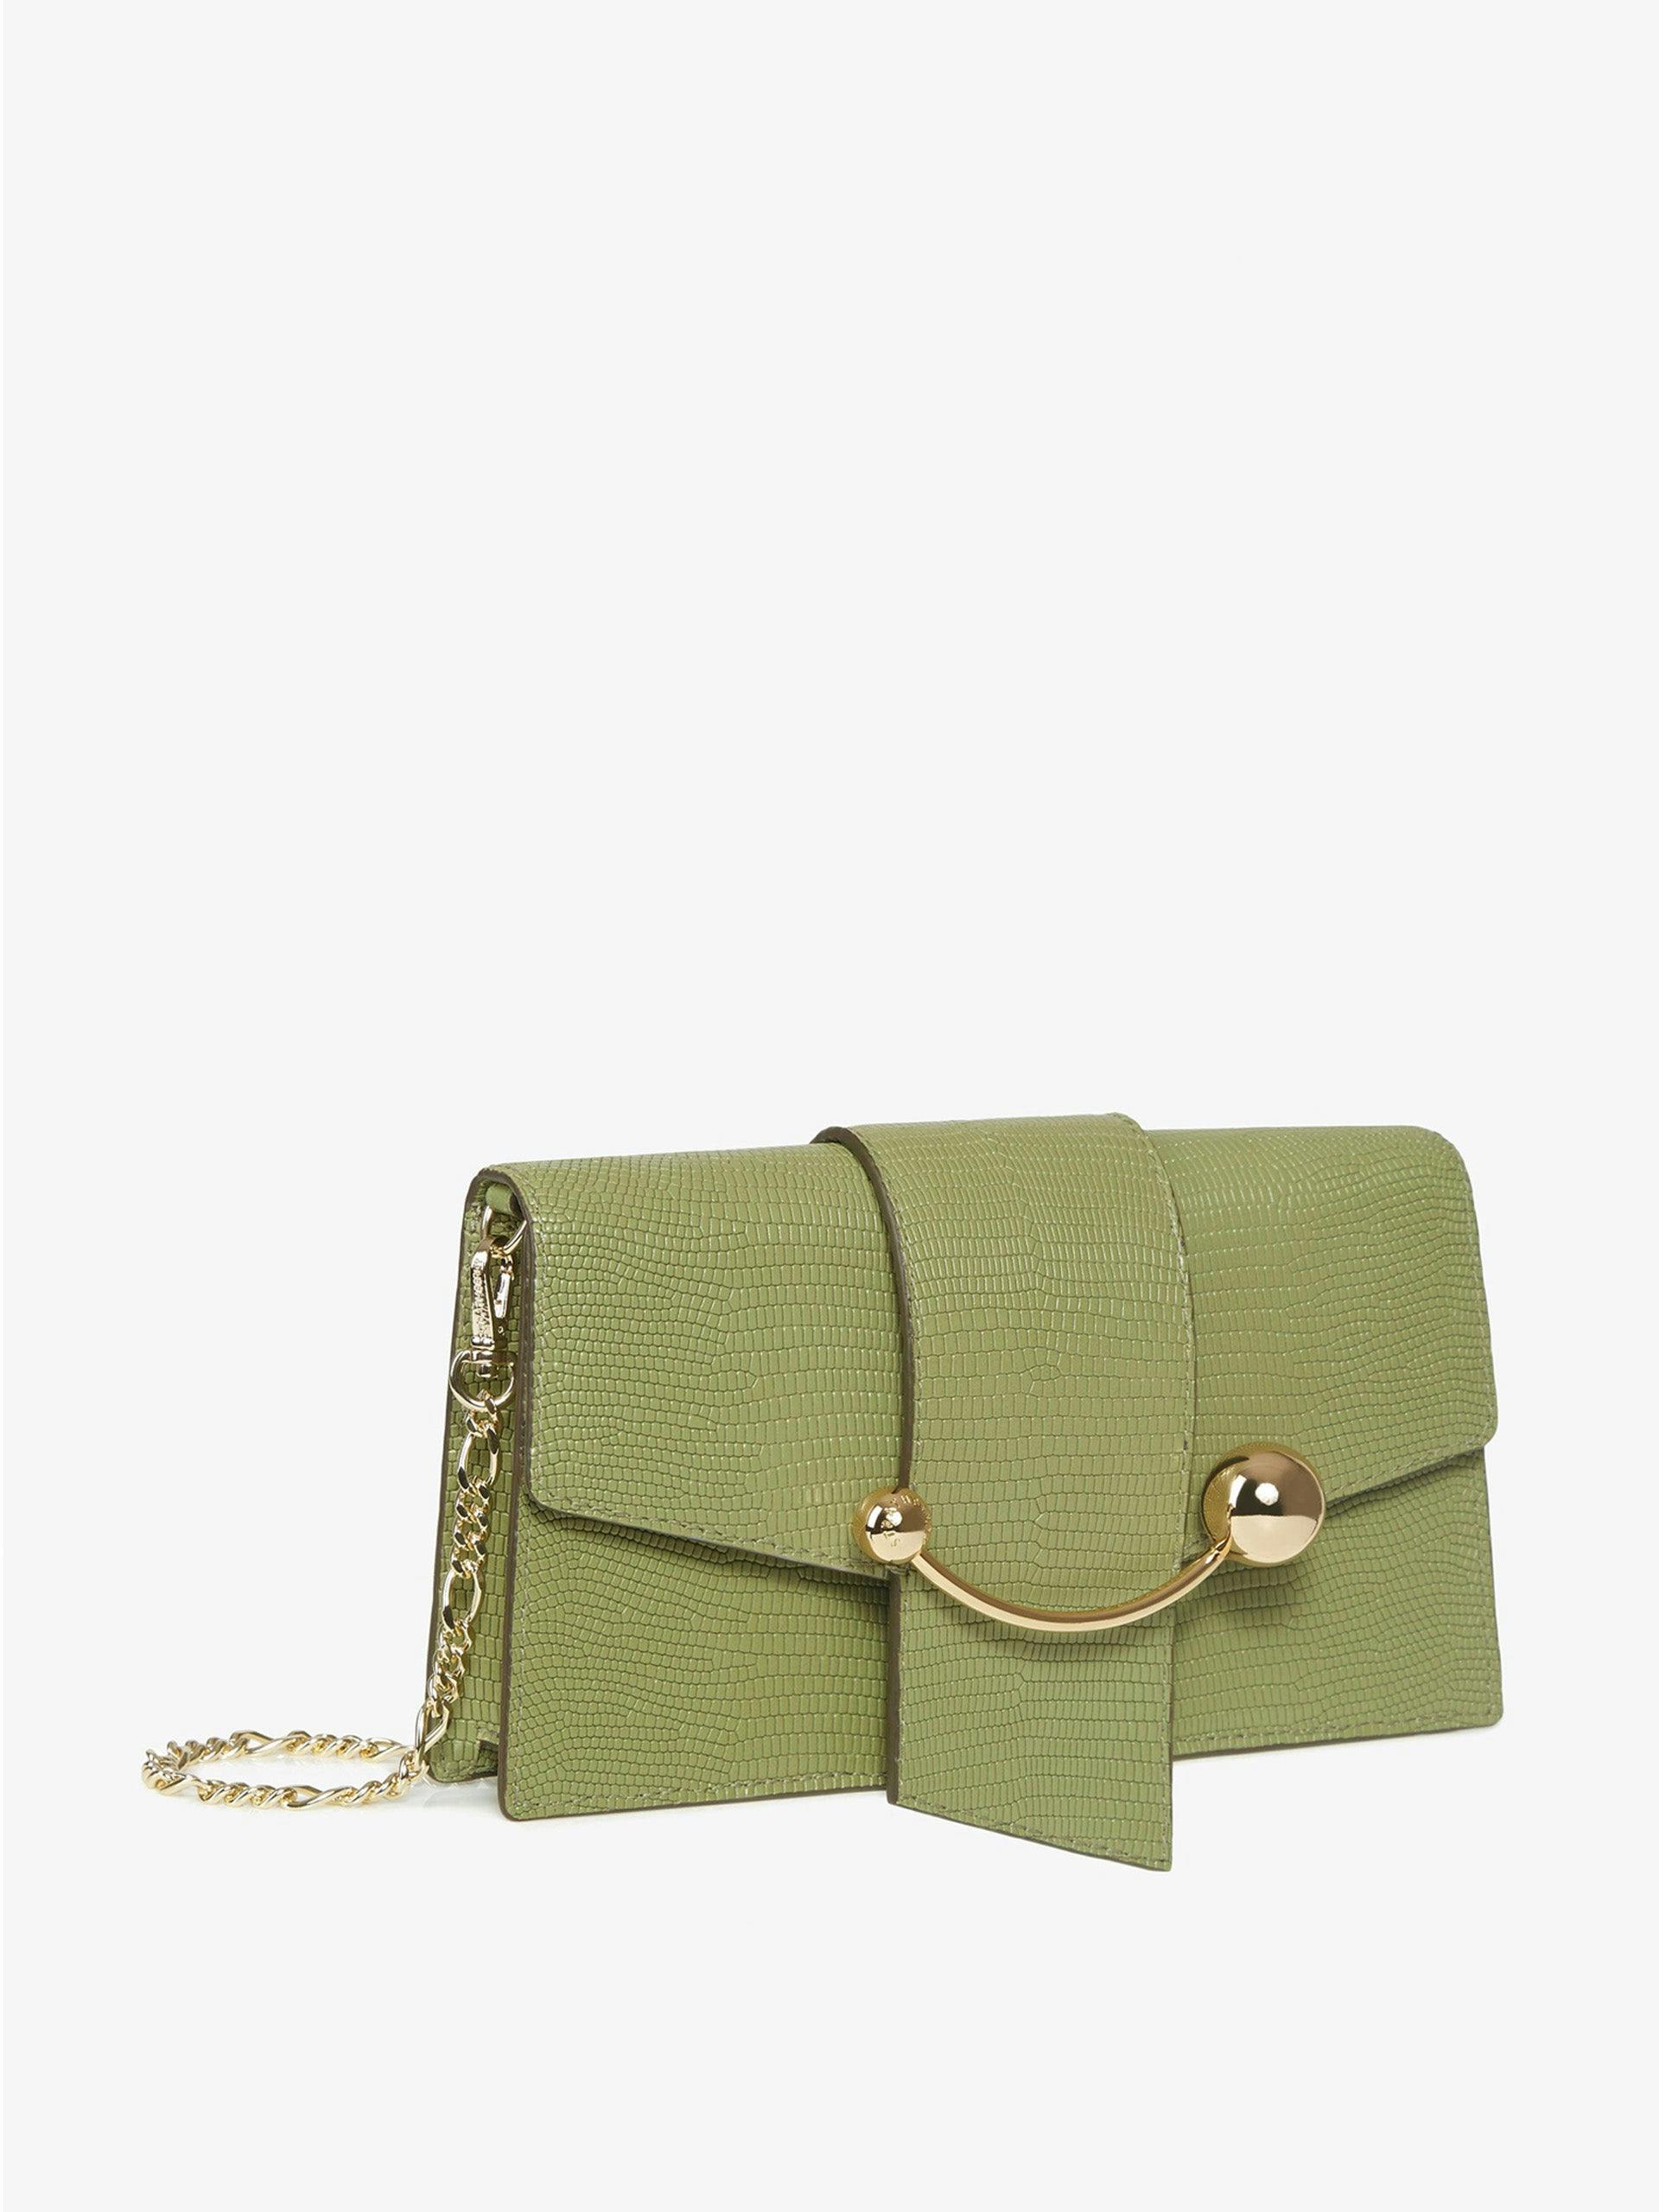 Lizard embossed olive leather Crescent bag, on a chain